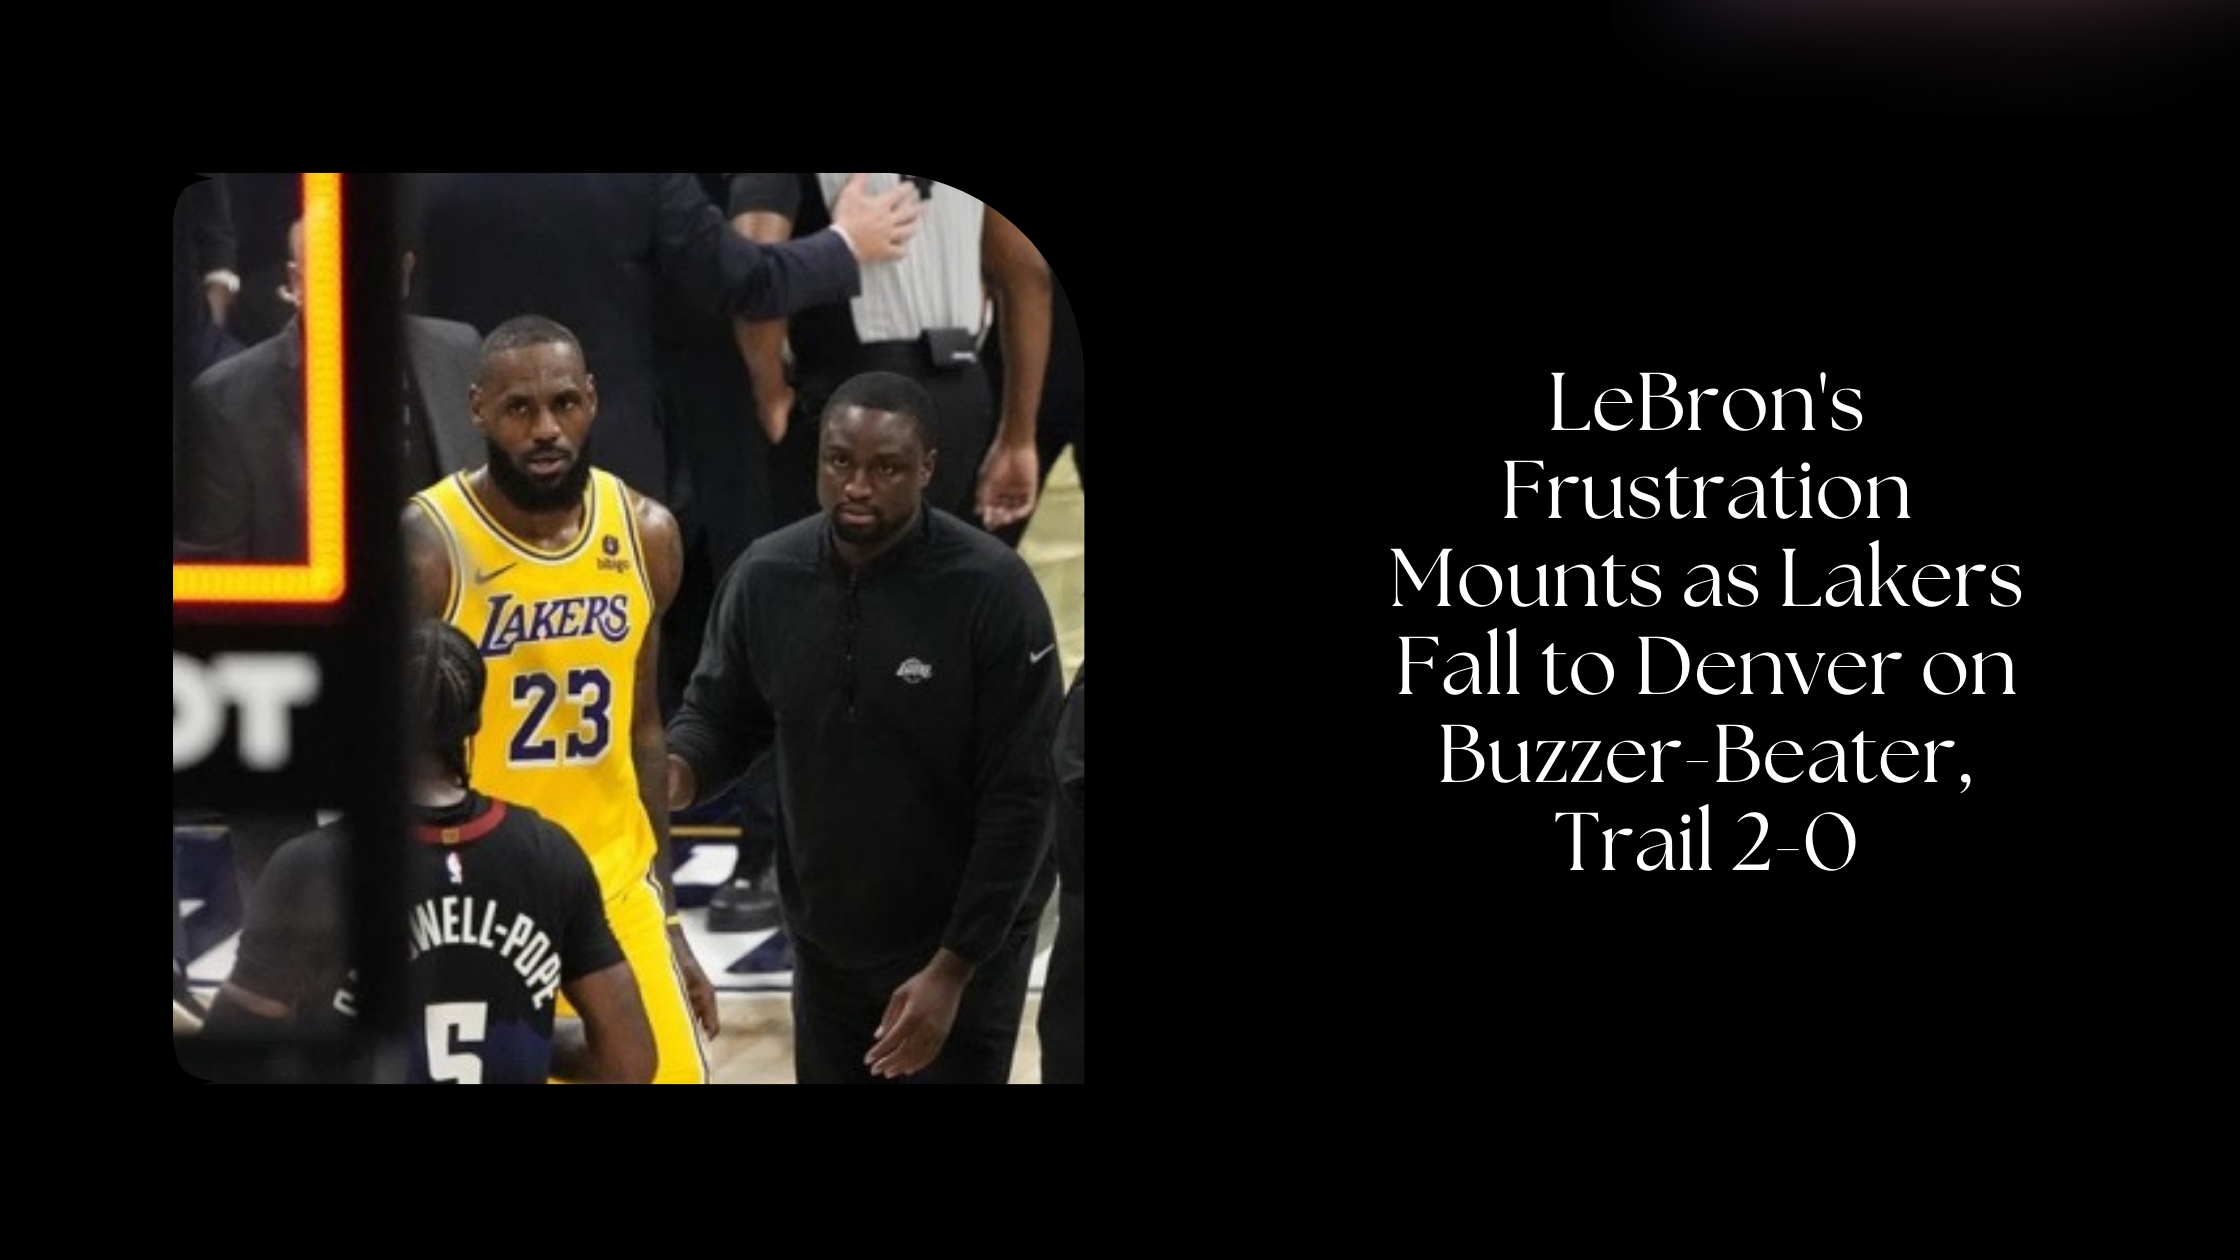 You are currently viewing LeBron’s Dissatisfaction Mounts as Lakers Tumble to Denver on Bell Blender Trail 2-0